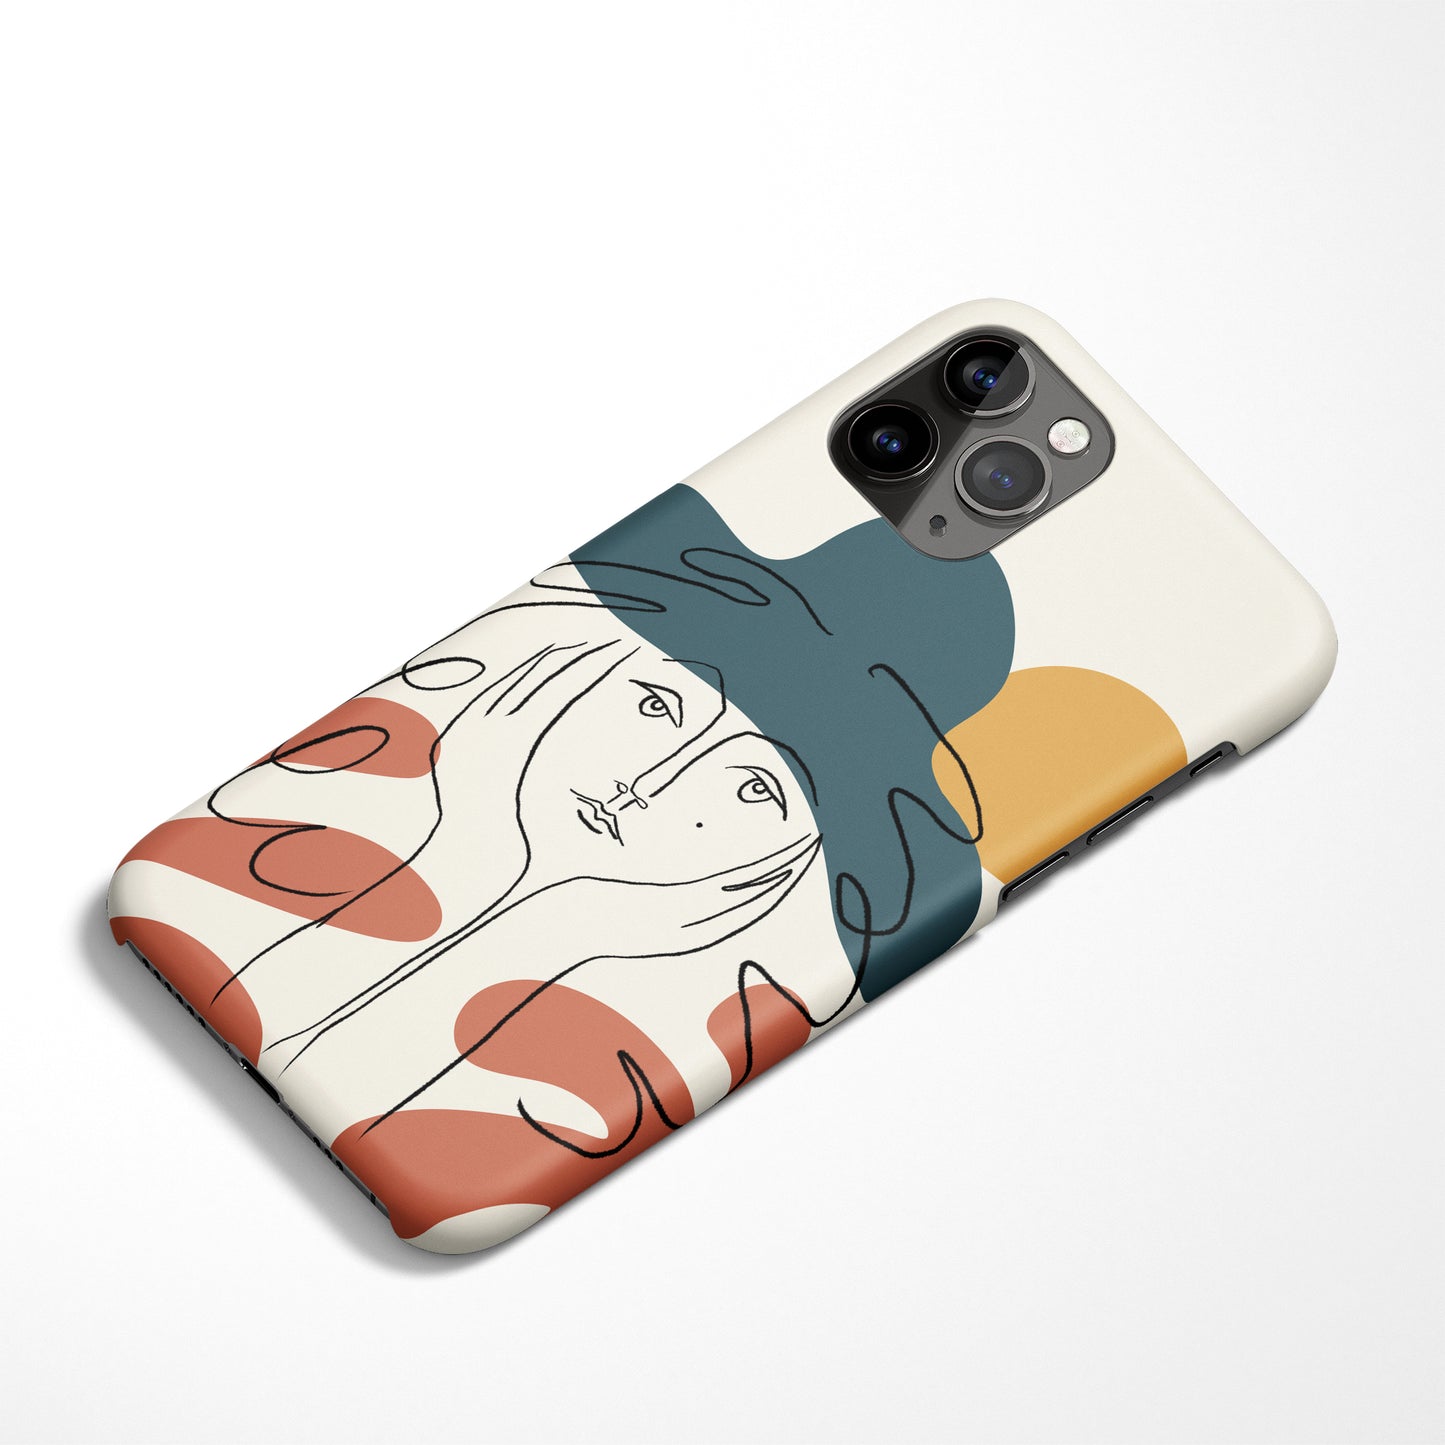 Picasso Face iPhone Case 3